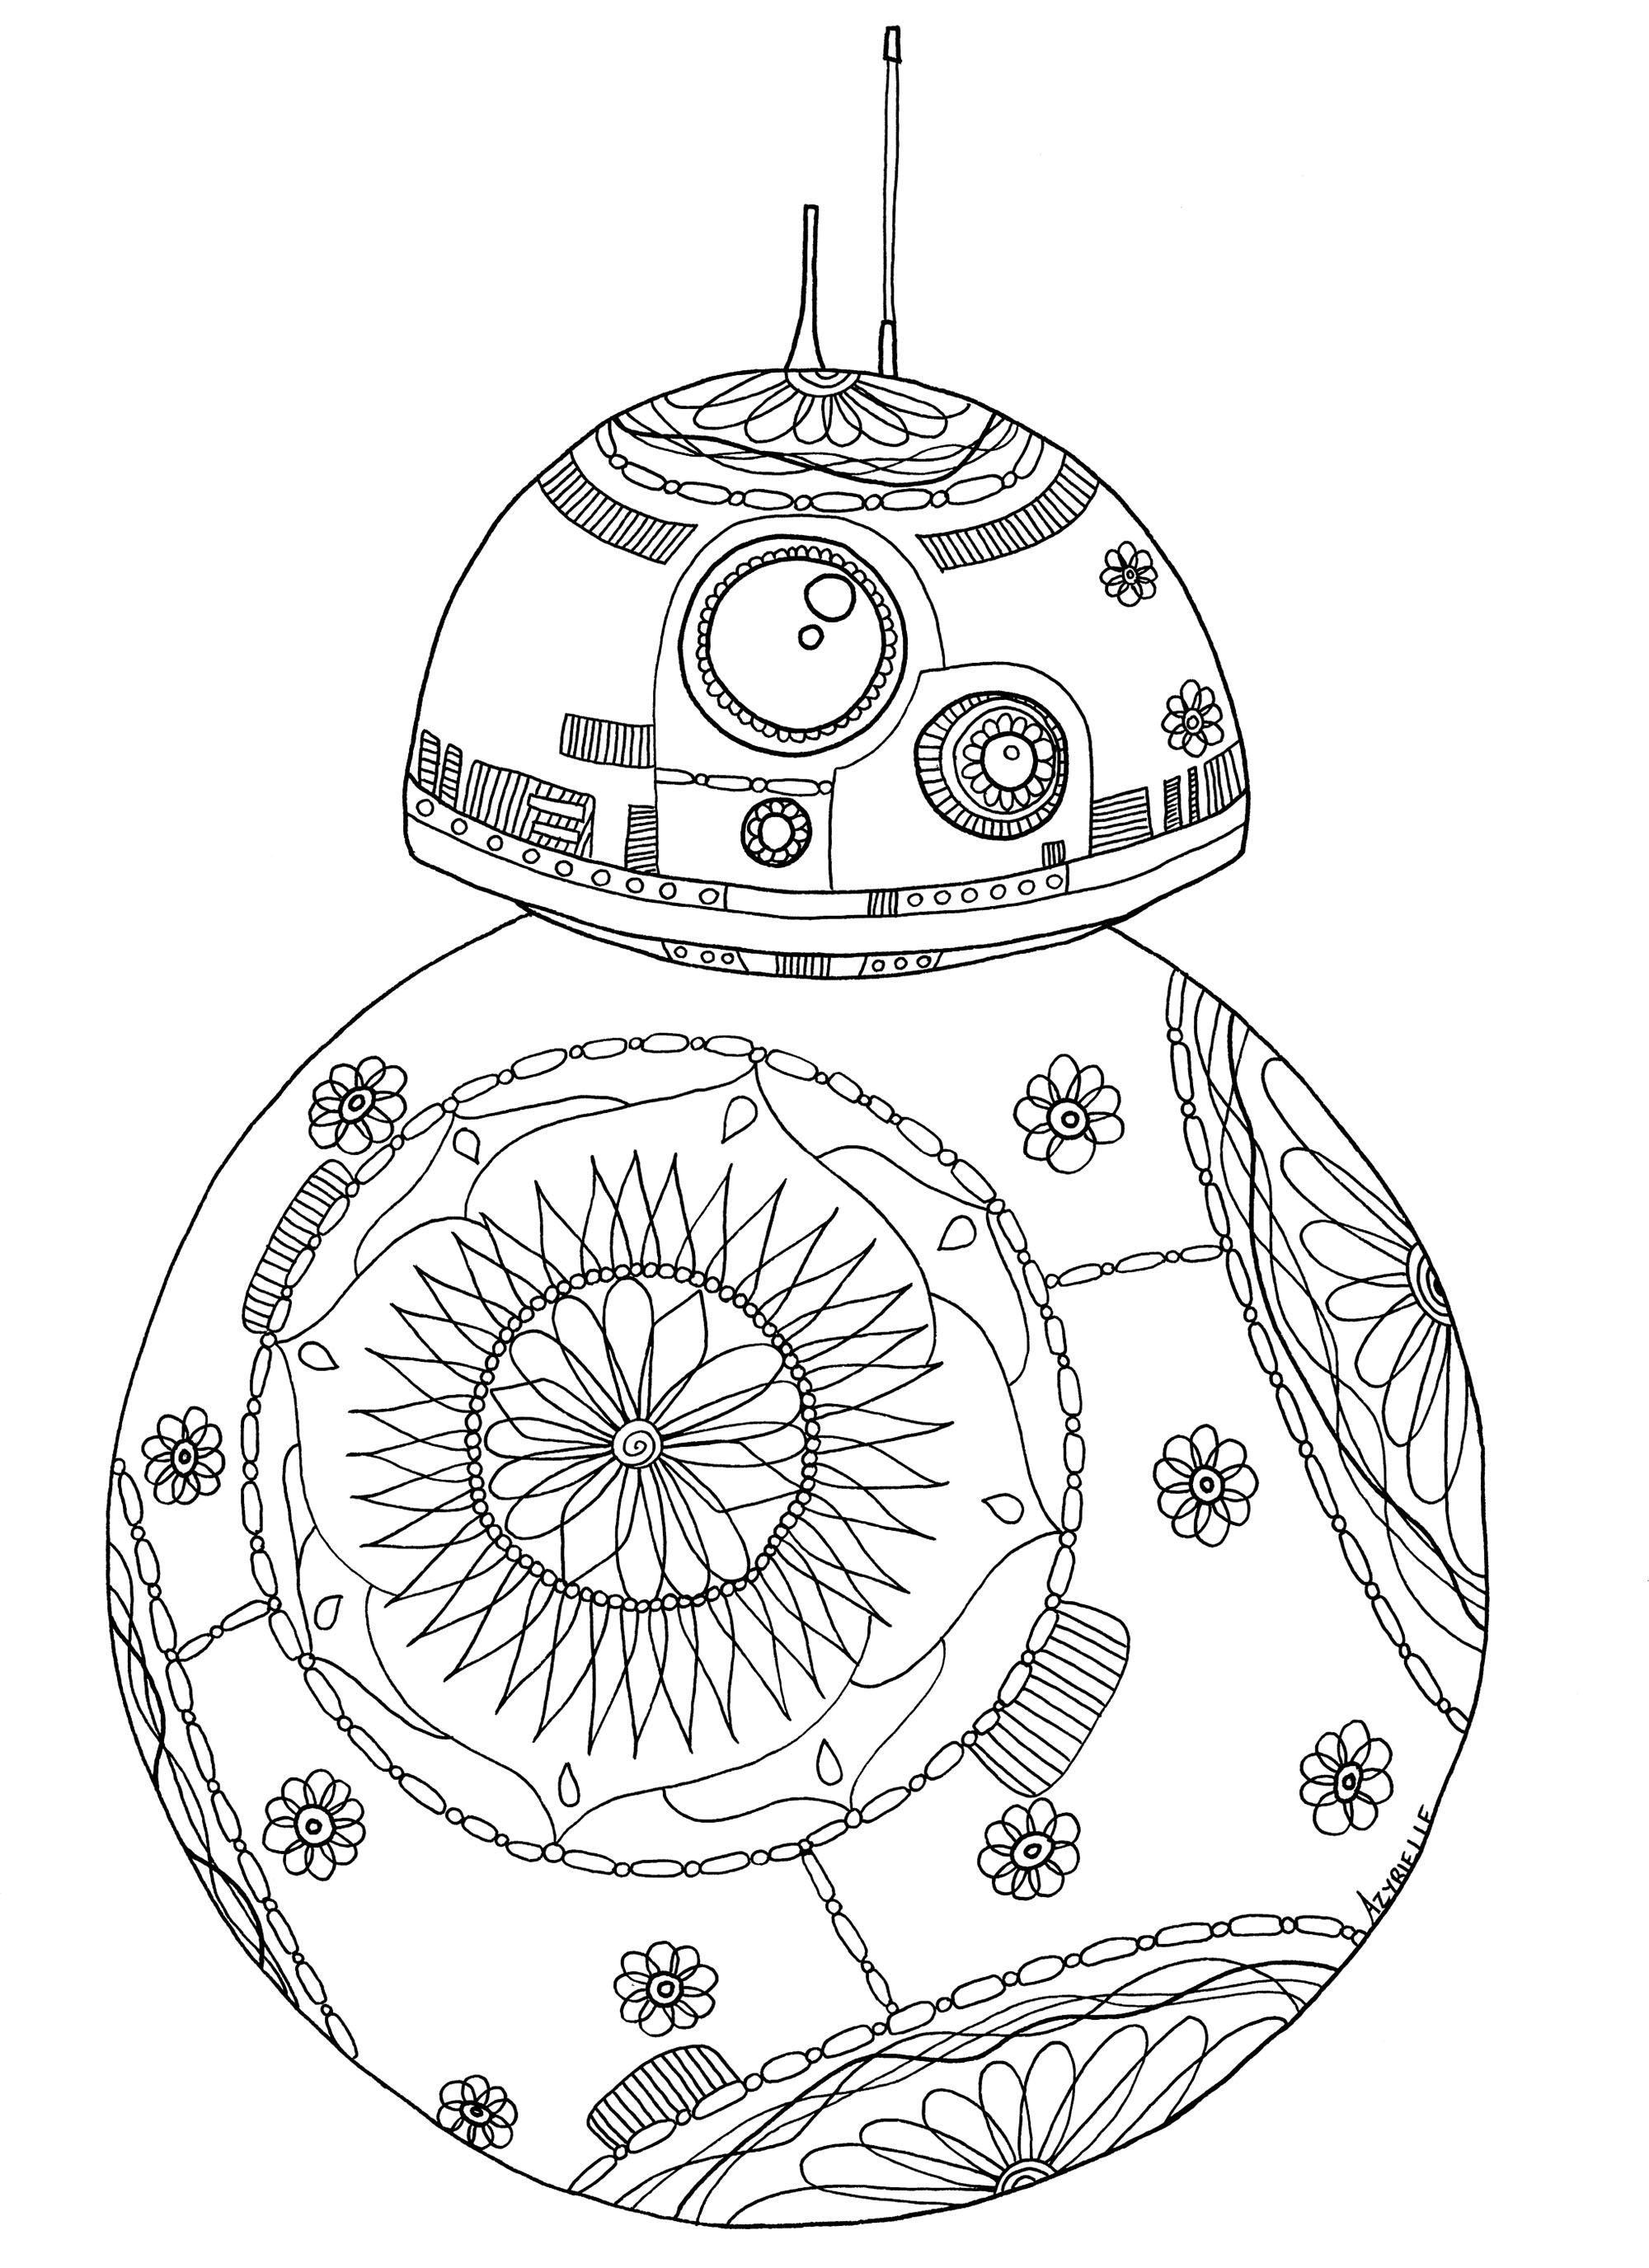 cute robot coloring page